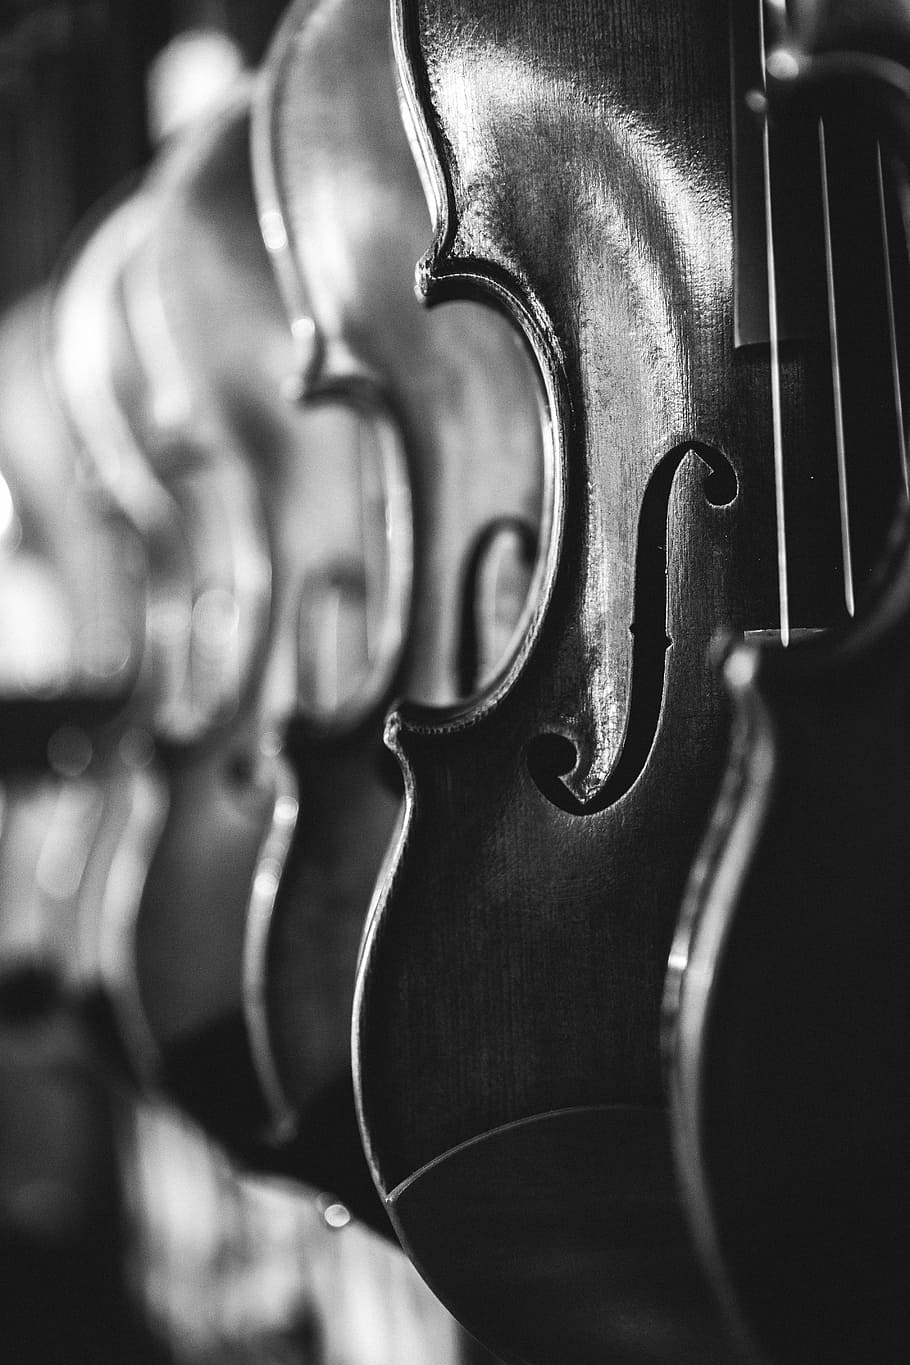 greyscale photo of violins, antique, black and white, blur, bowed stringed instrument